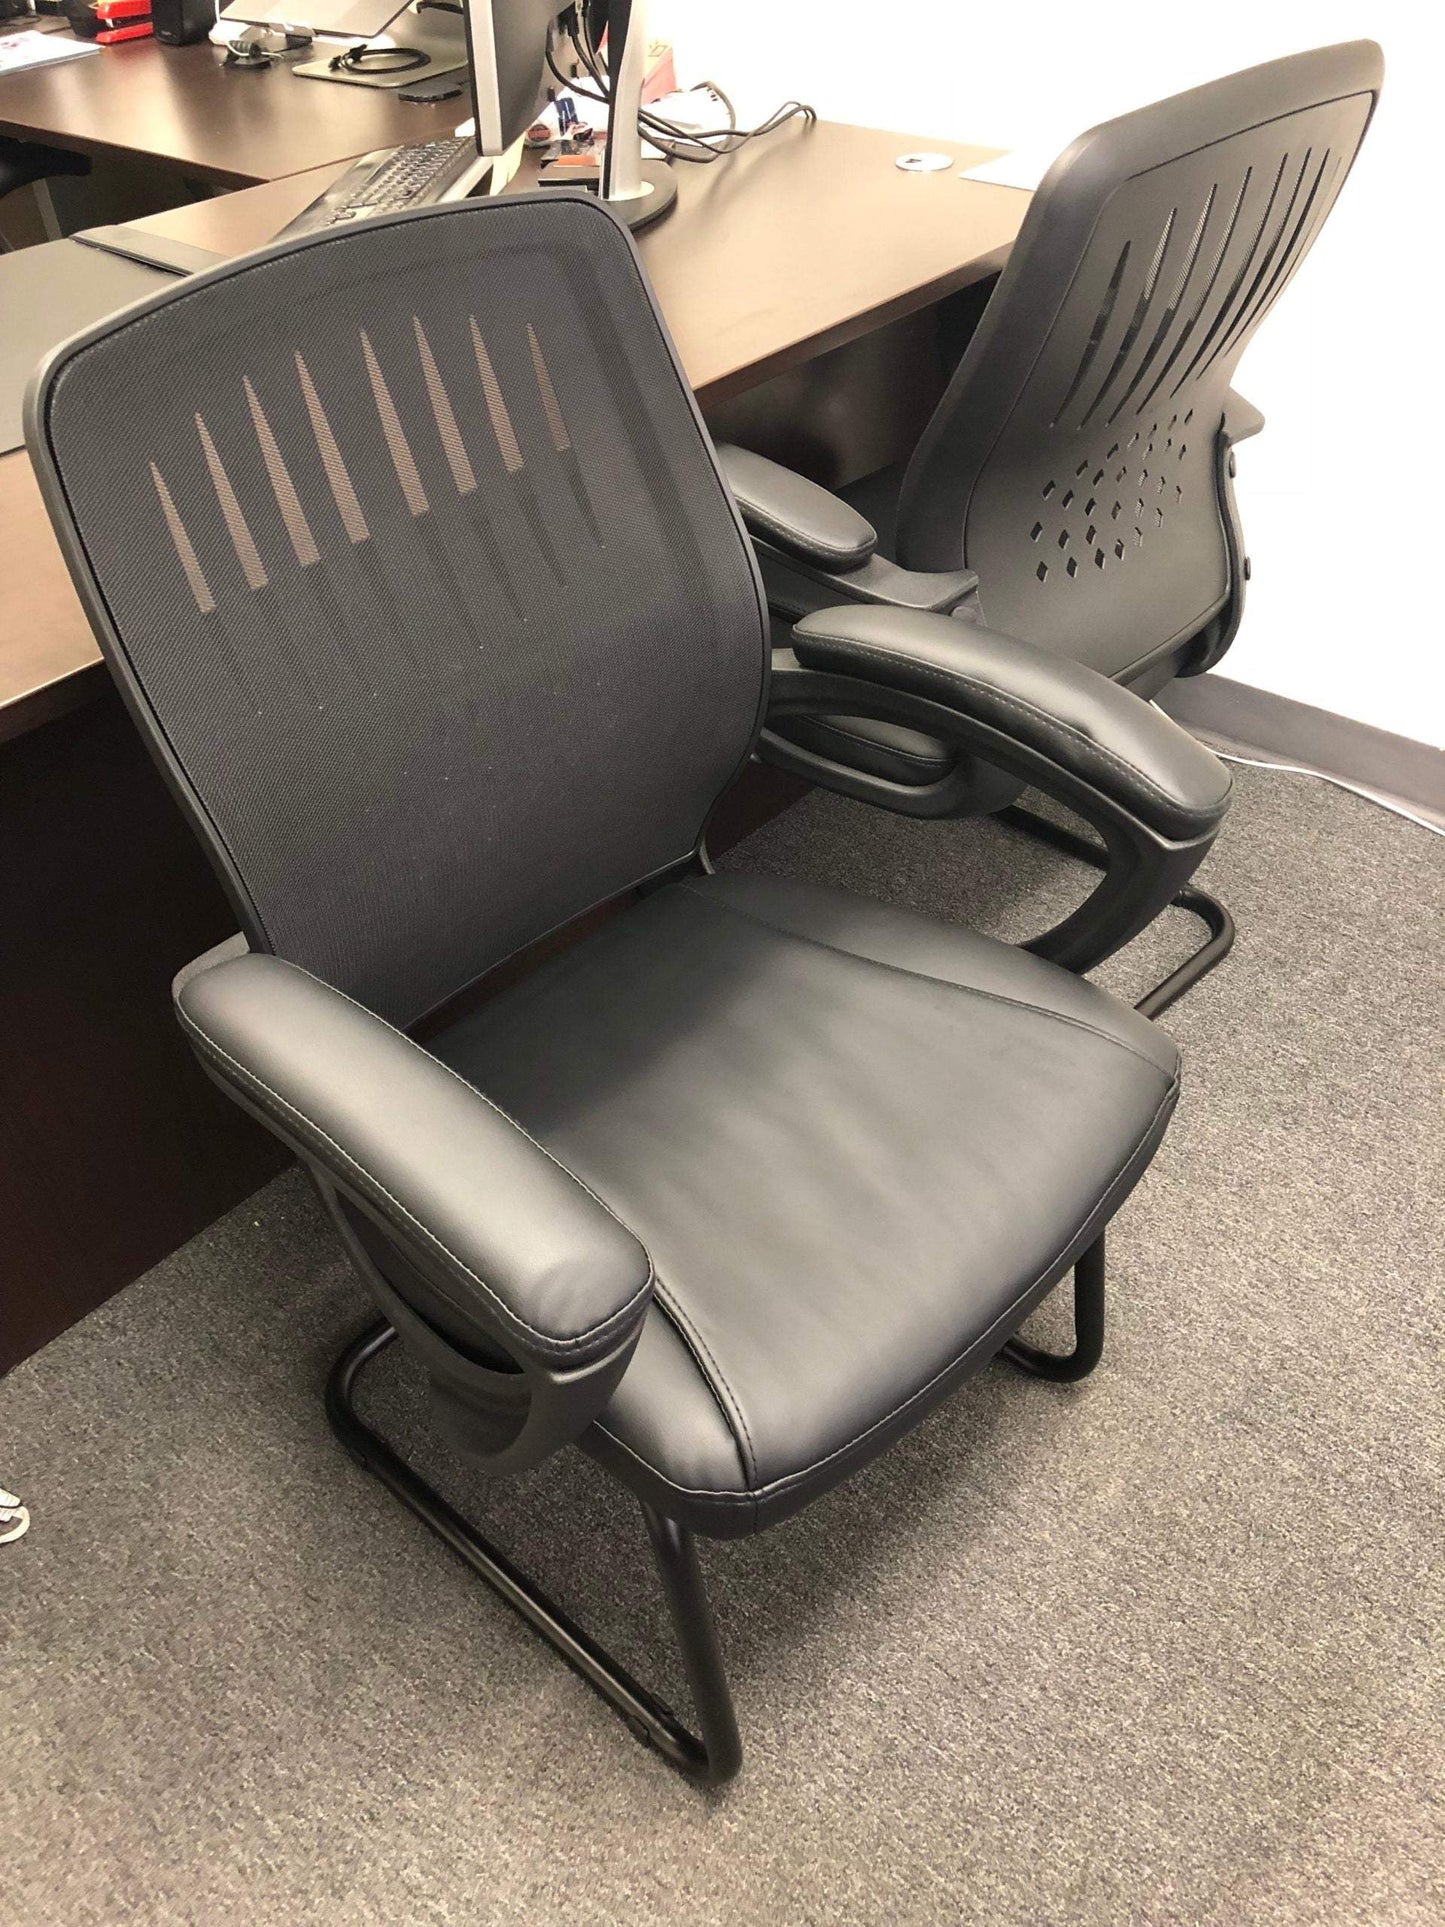 NEW Black Mesh Back Designer Contour Guest Chair with Leather Seat and Arms by Office Star